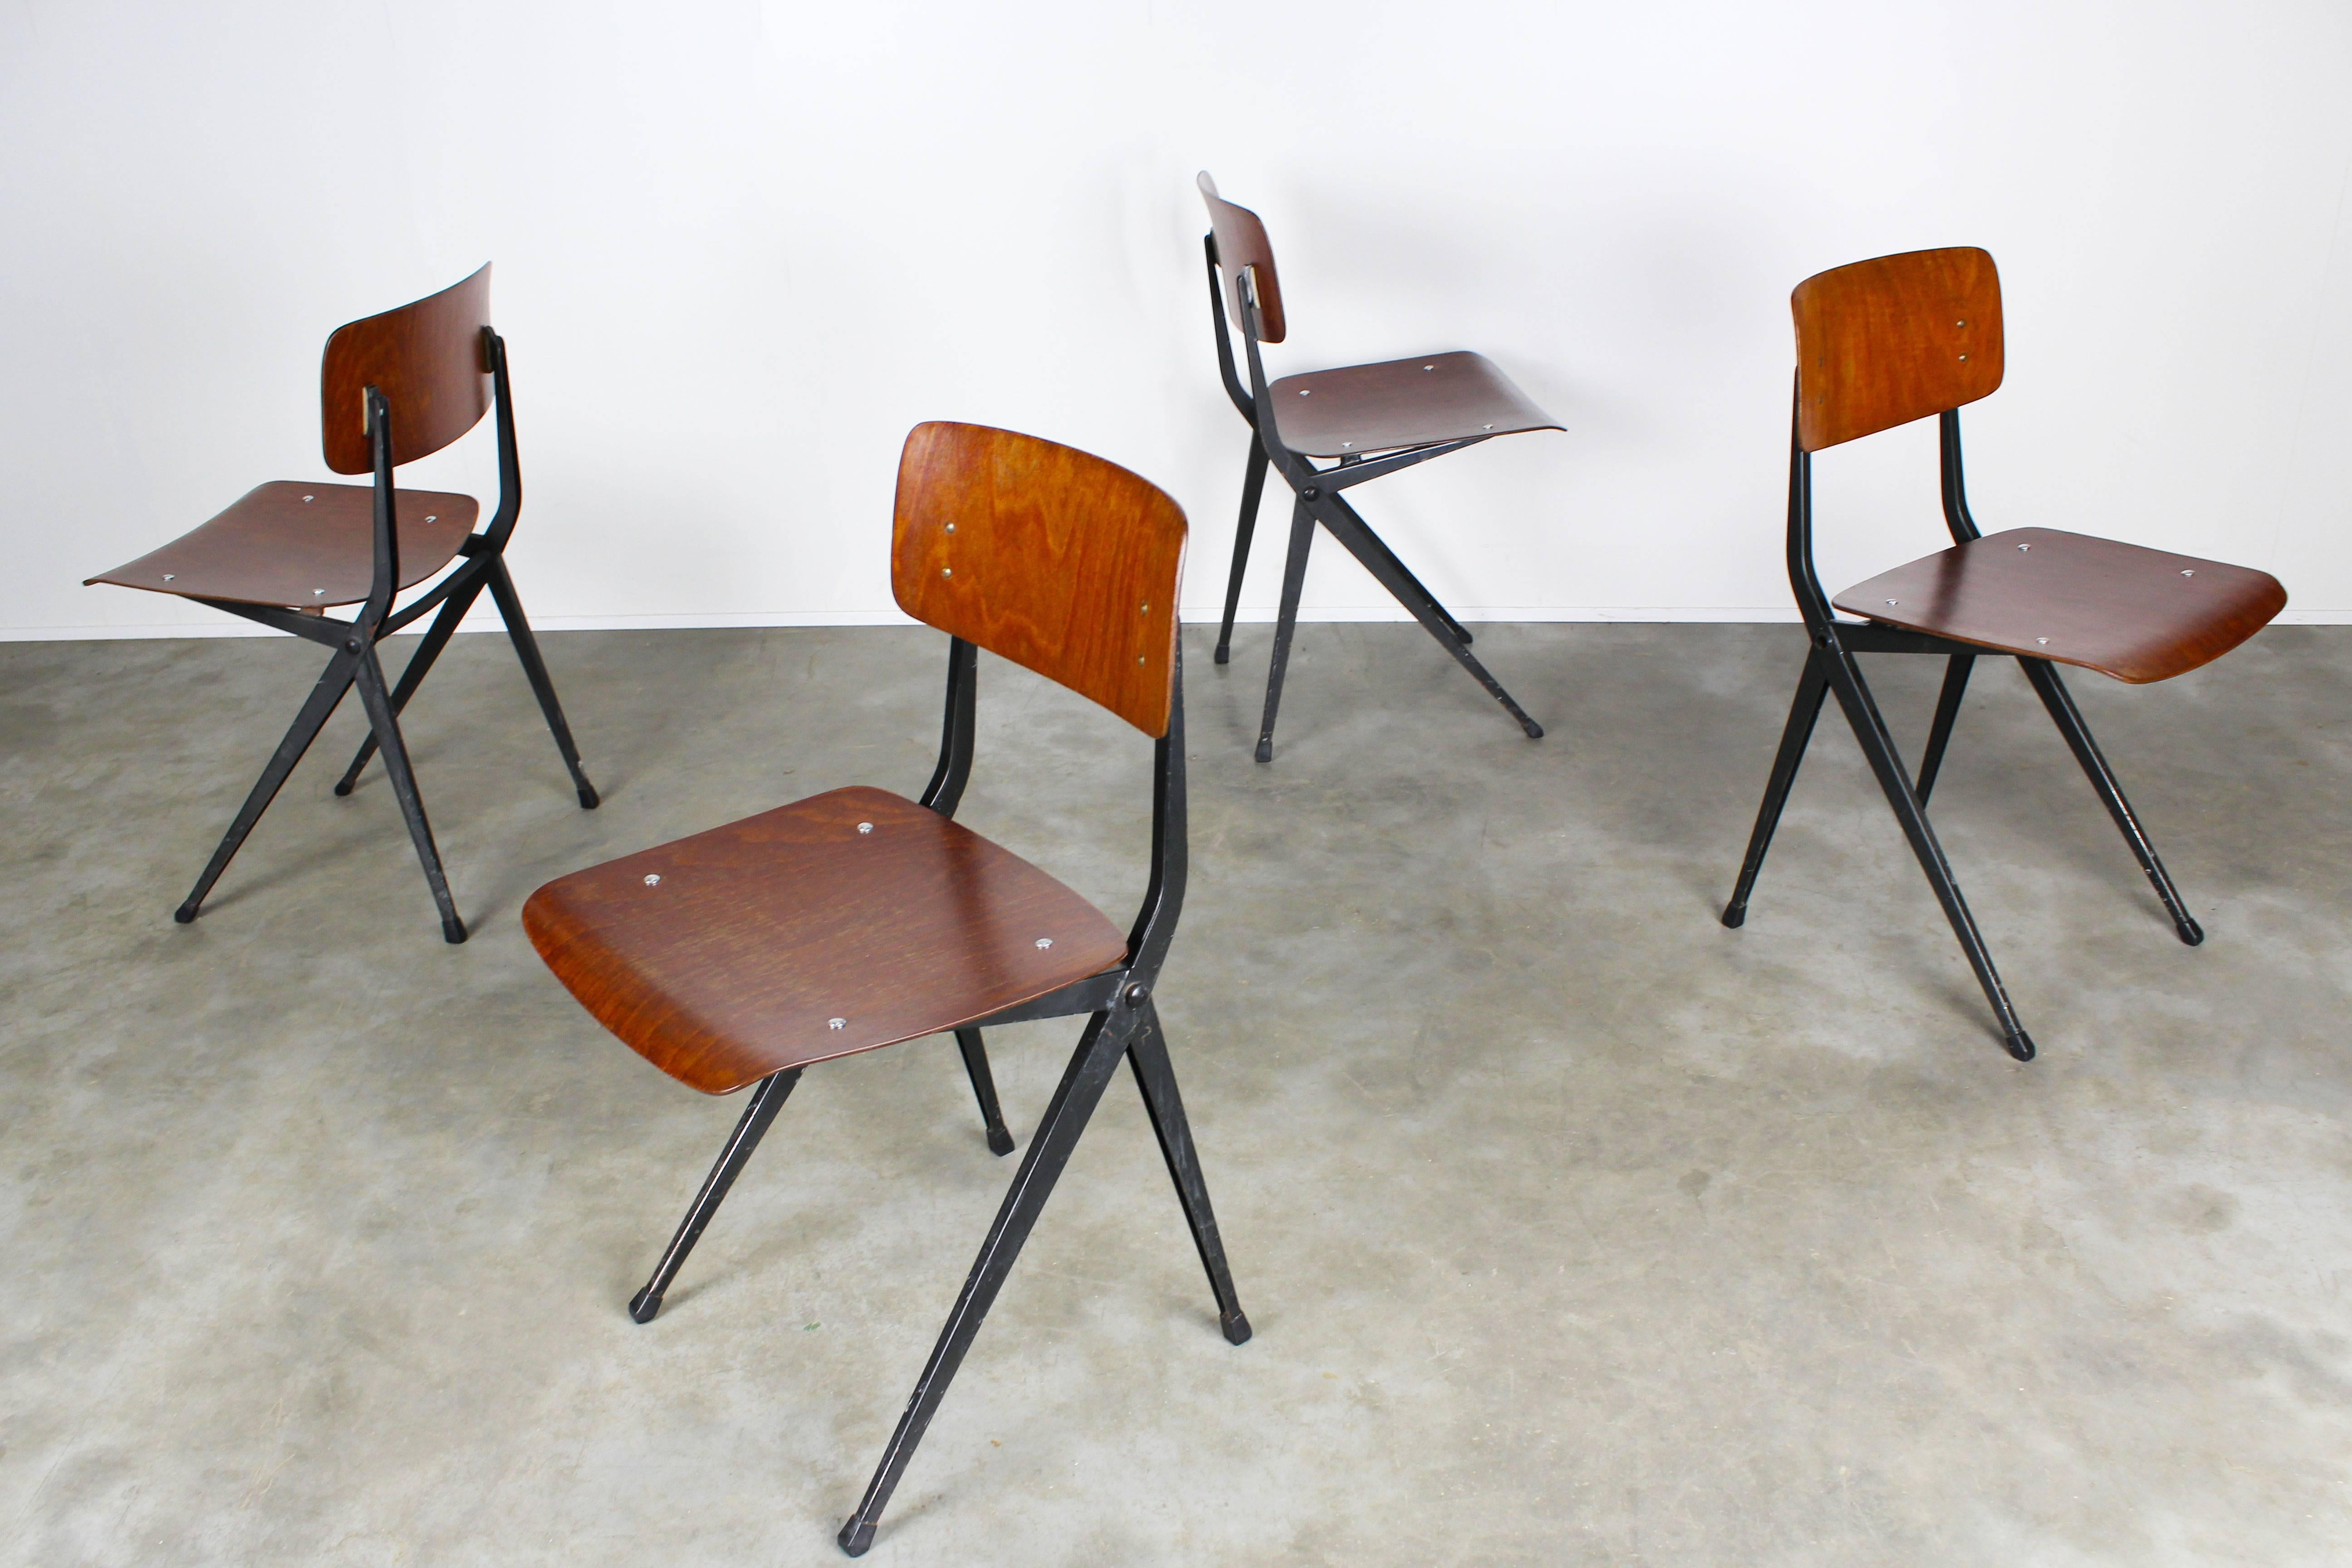 Set of eight Dutch Industrial Design dining chairs by Marko. The steel frame has the elegant compass shape distinctive to Friso Kramer & Gerrit Rietveld. Black frame with warm plywood seat and backrest. Traces of age and use on frame and wood please